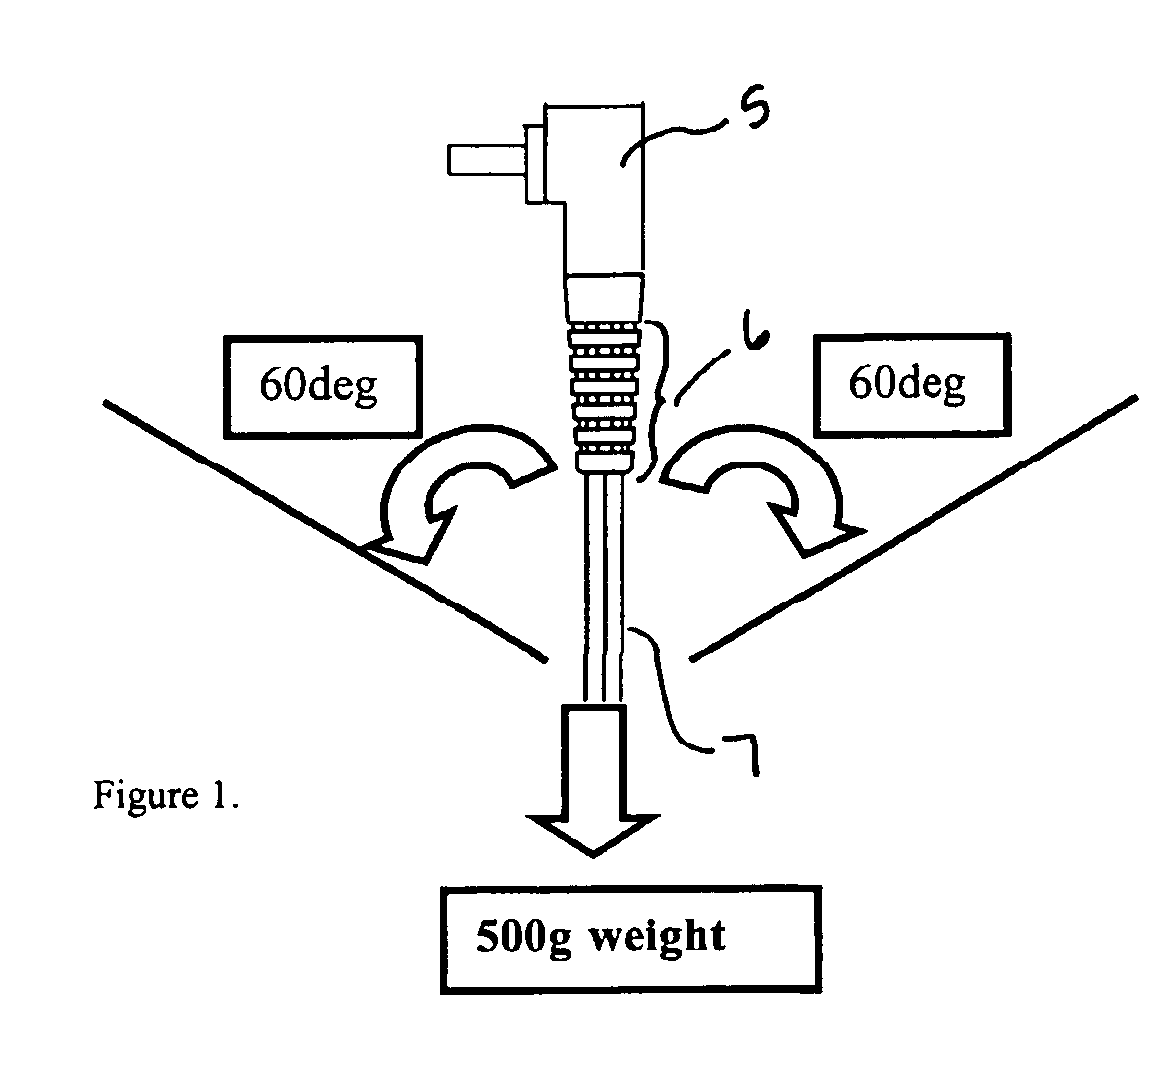 Flexible poly(arylene ether)composition and articles thereof